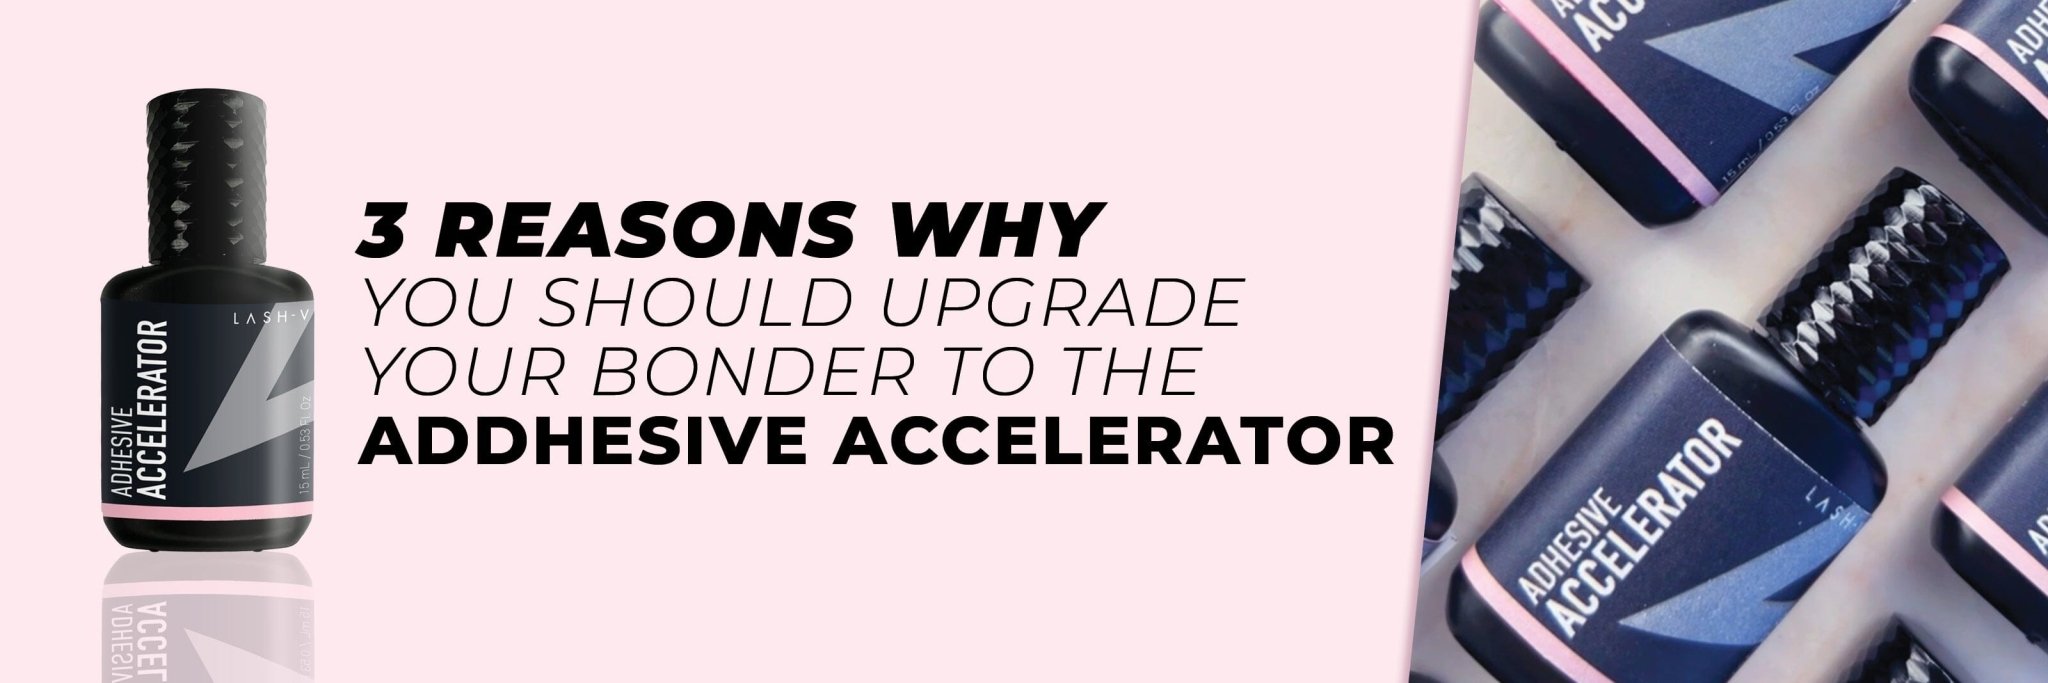 Here's why you should upgrade your Bonder to our new Adhesive Accelerator - LASH V